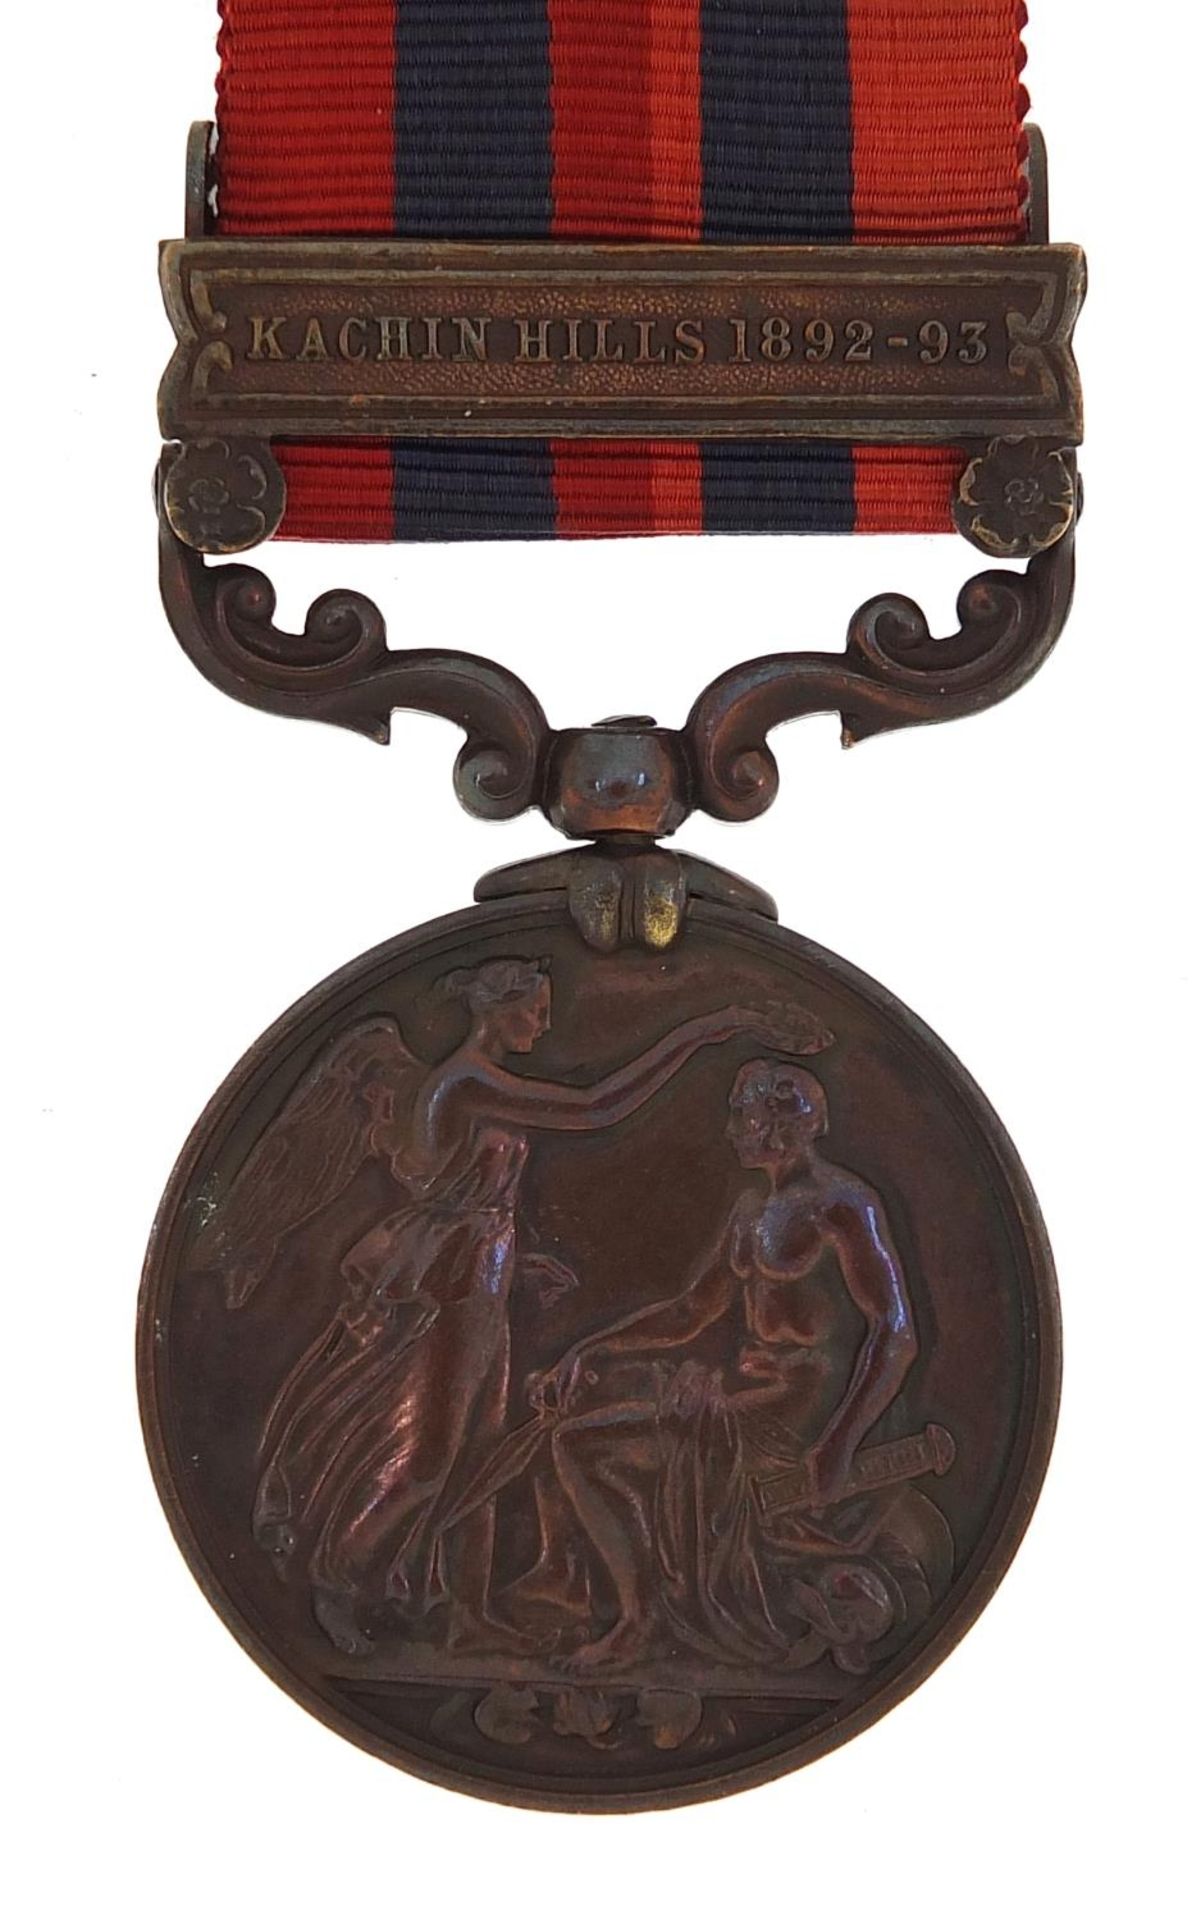 Victorian British military India General Service medal with Kachin Hills 1892-93 bar